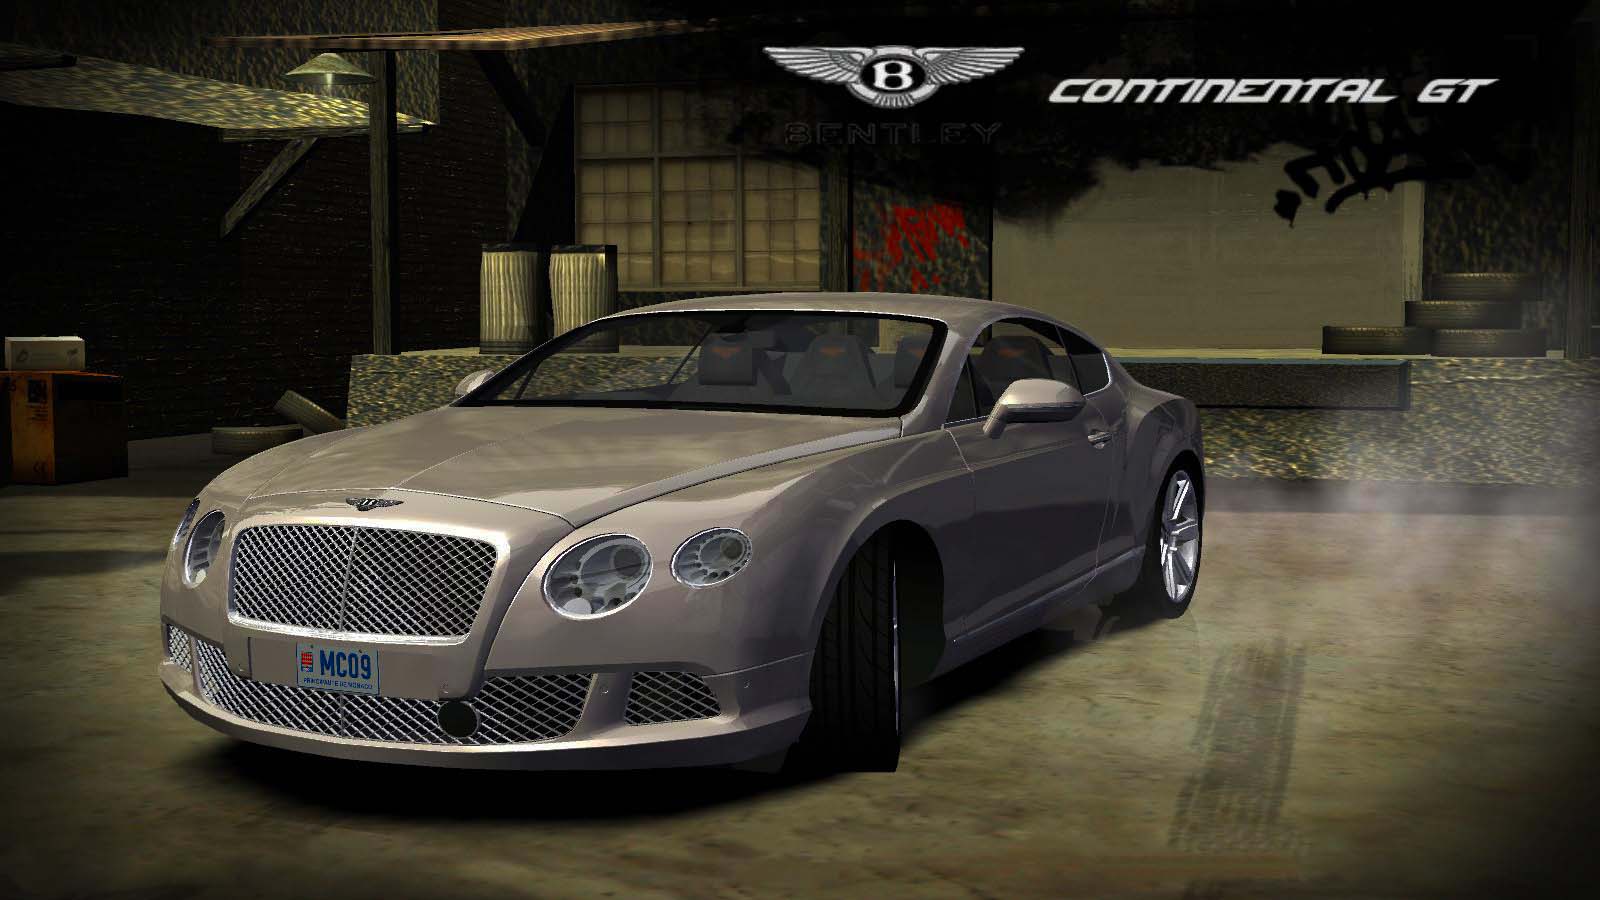 Need For Speed Most Wanted Bentley Continental GT (2012)